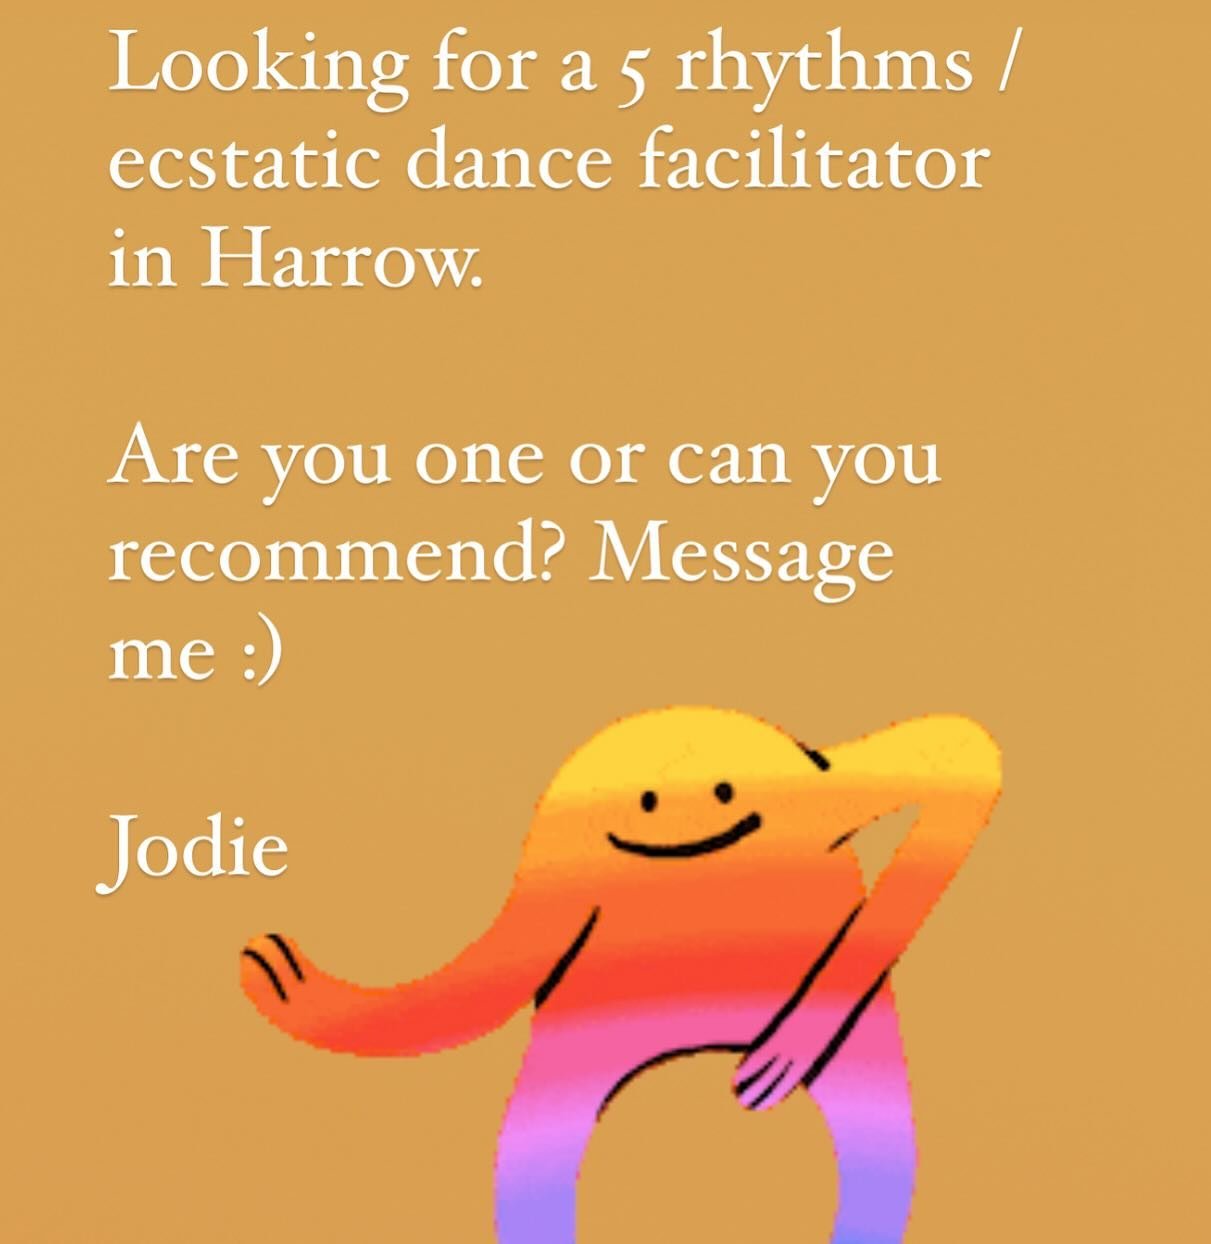 Looking for a 5rhythms / ecstatic dance facilitator to potentially facilitate session(s) in North Harrow for group of adults w. LD.  If you do this your self or know someone please message me 🙏🏻✉️